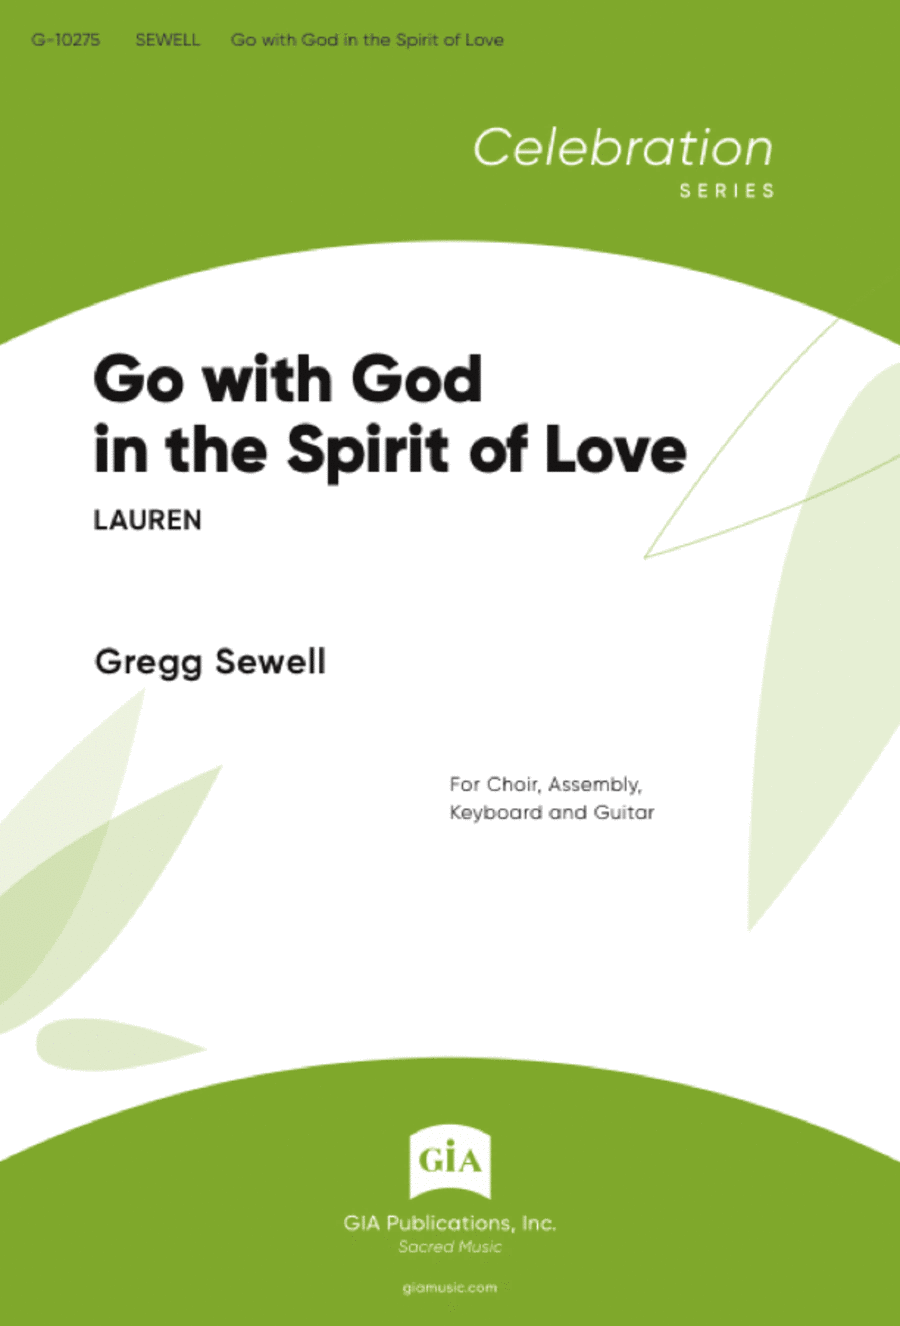 Go with God in the Spirit of Love